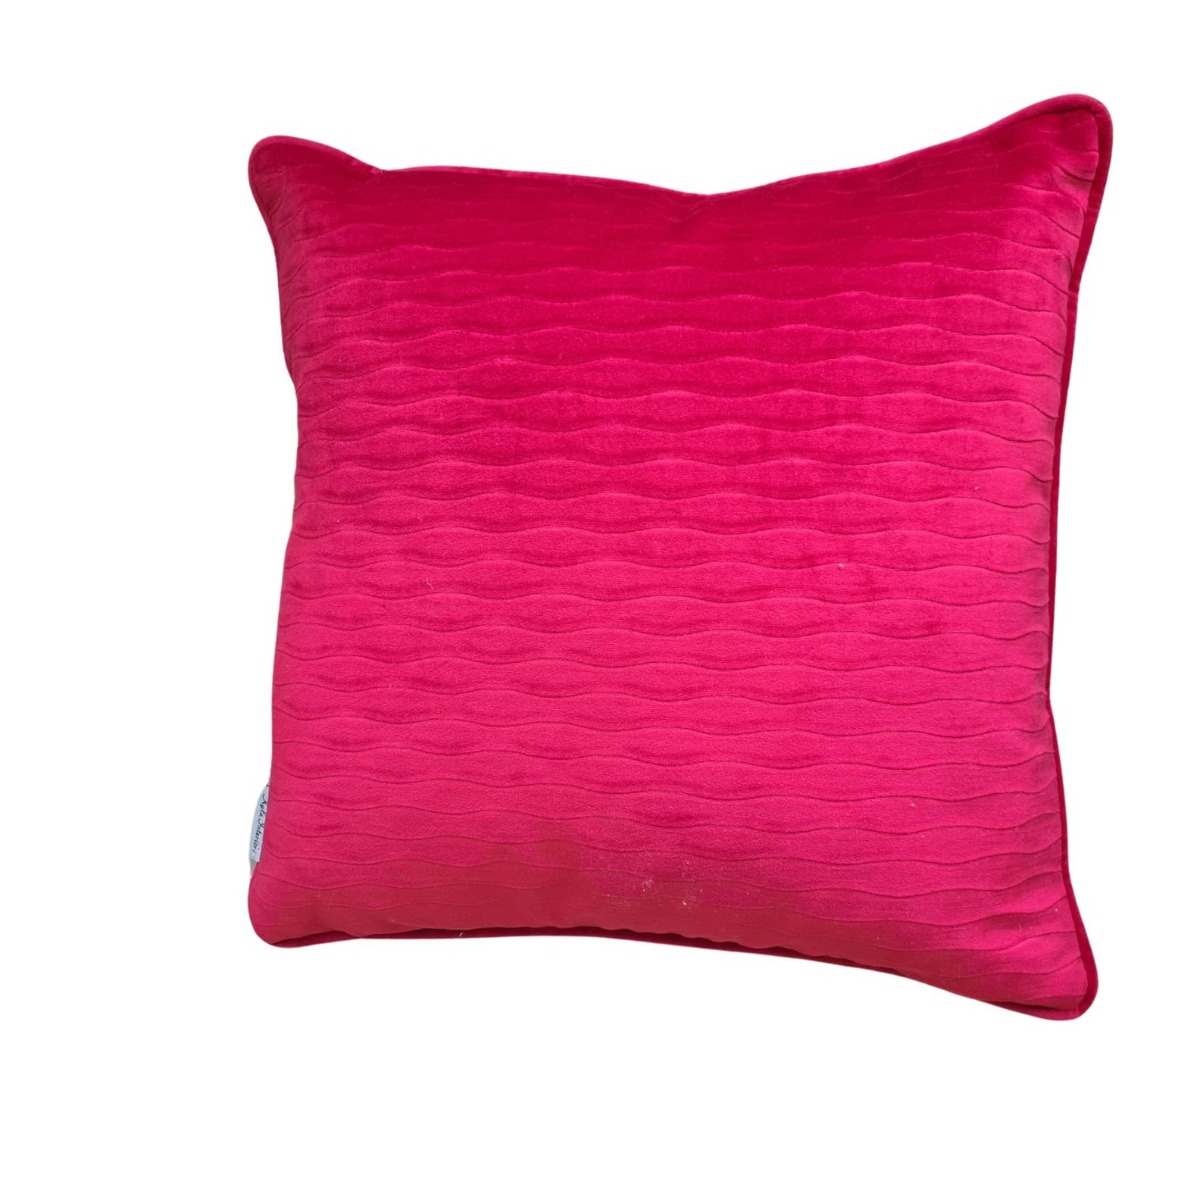 Defined Wave Red Cushion